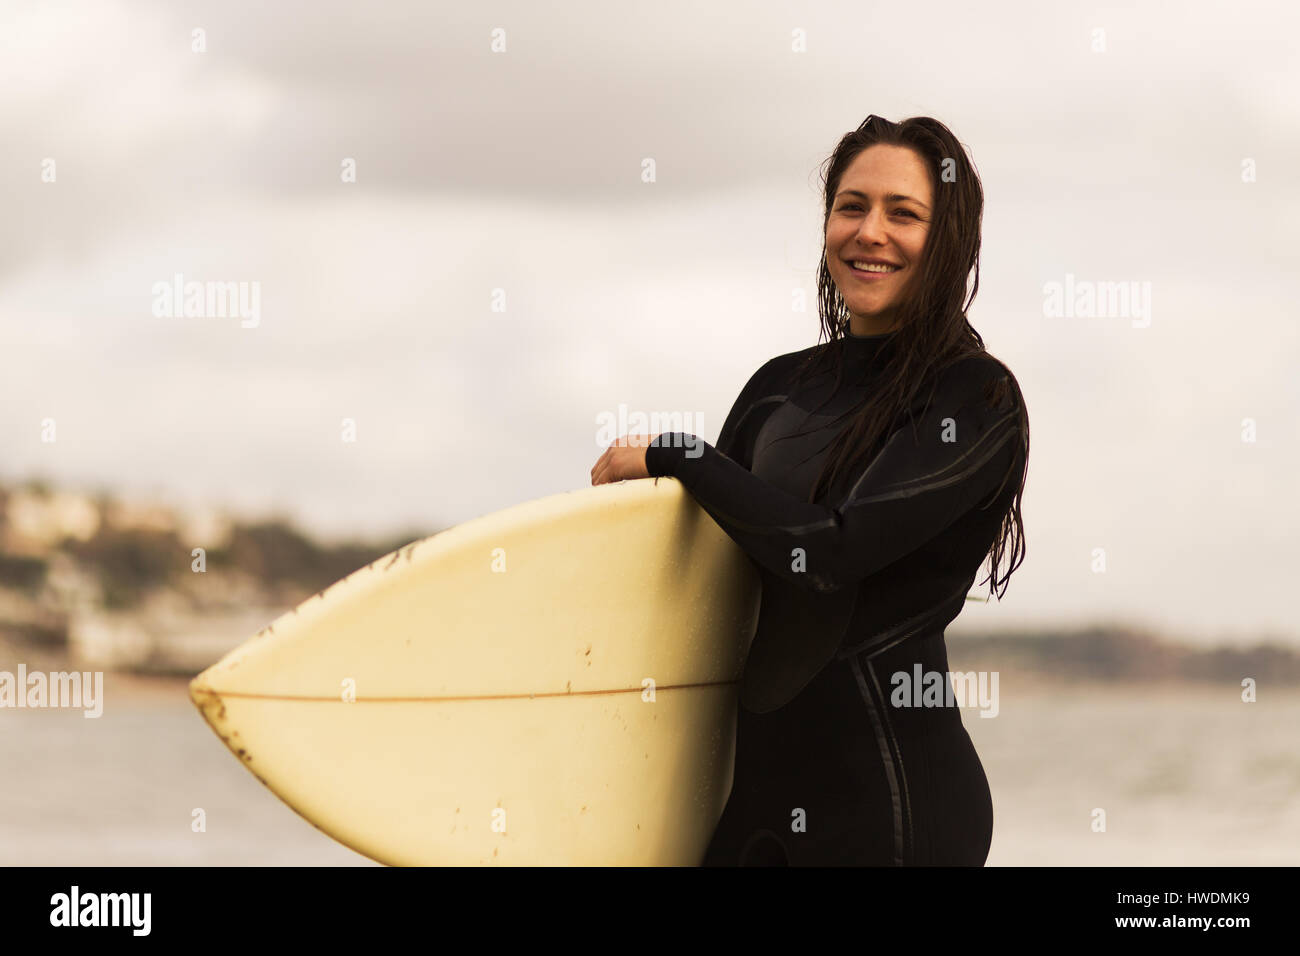 Young woman walking away from sea, carrying surfboards Stock Photo